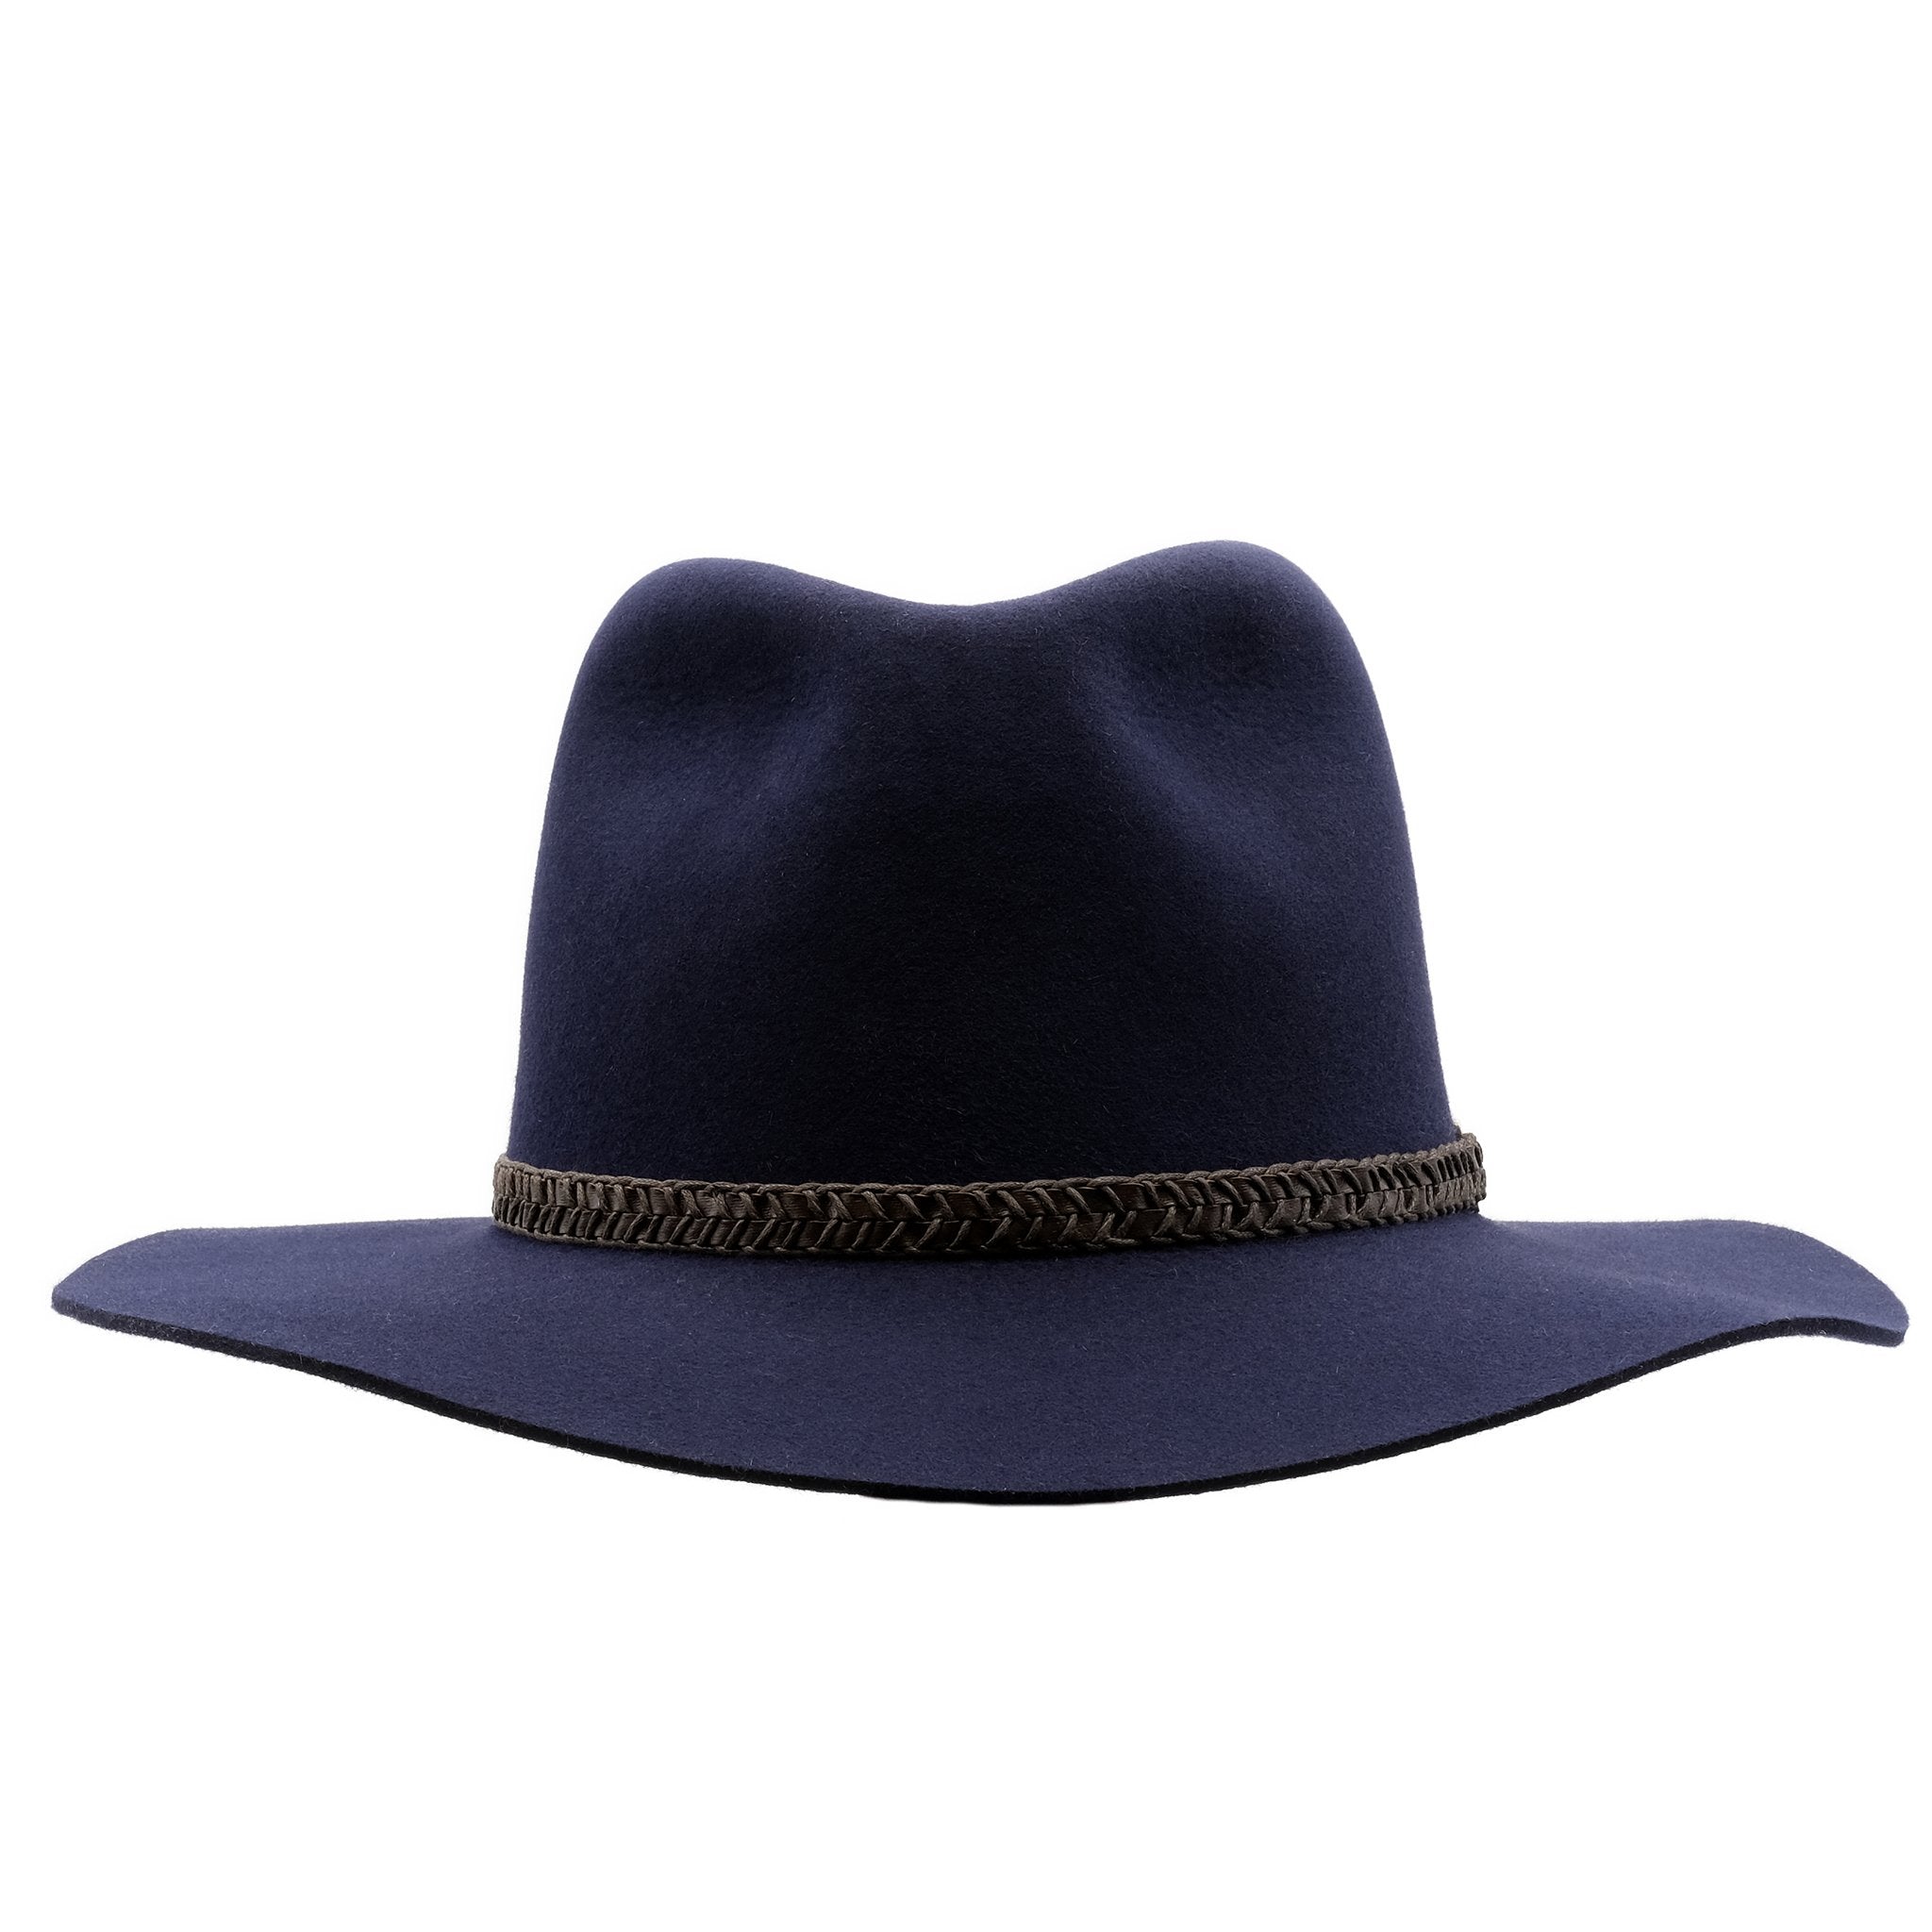 Front on view of the Akubra Avalon hat in Federation Navy colour